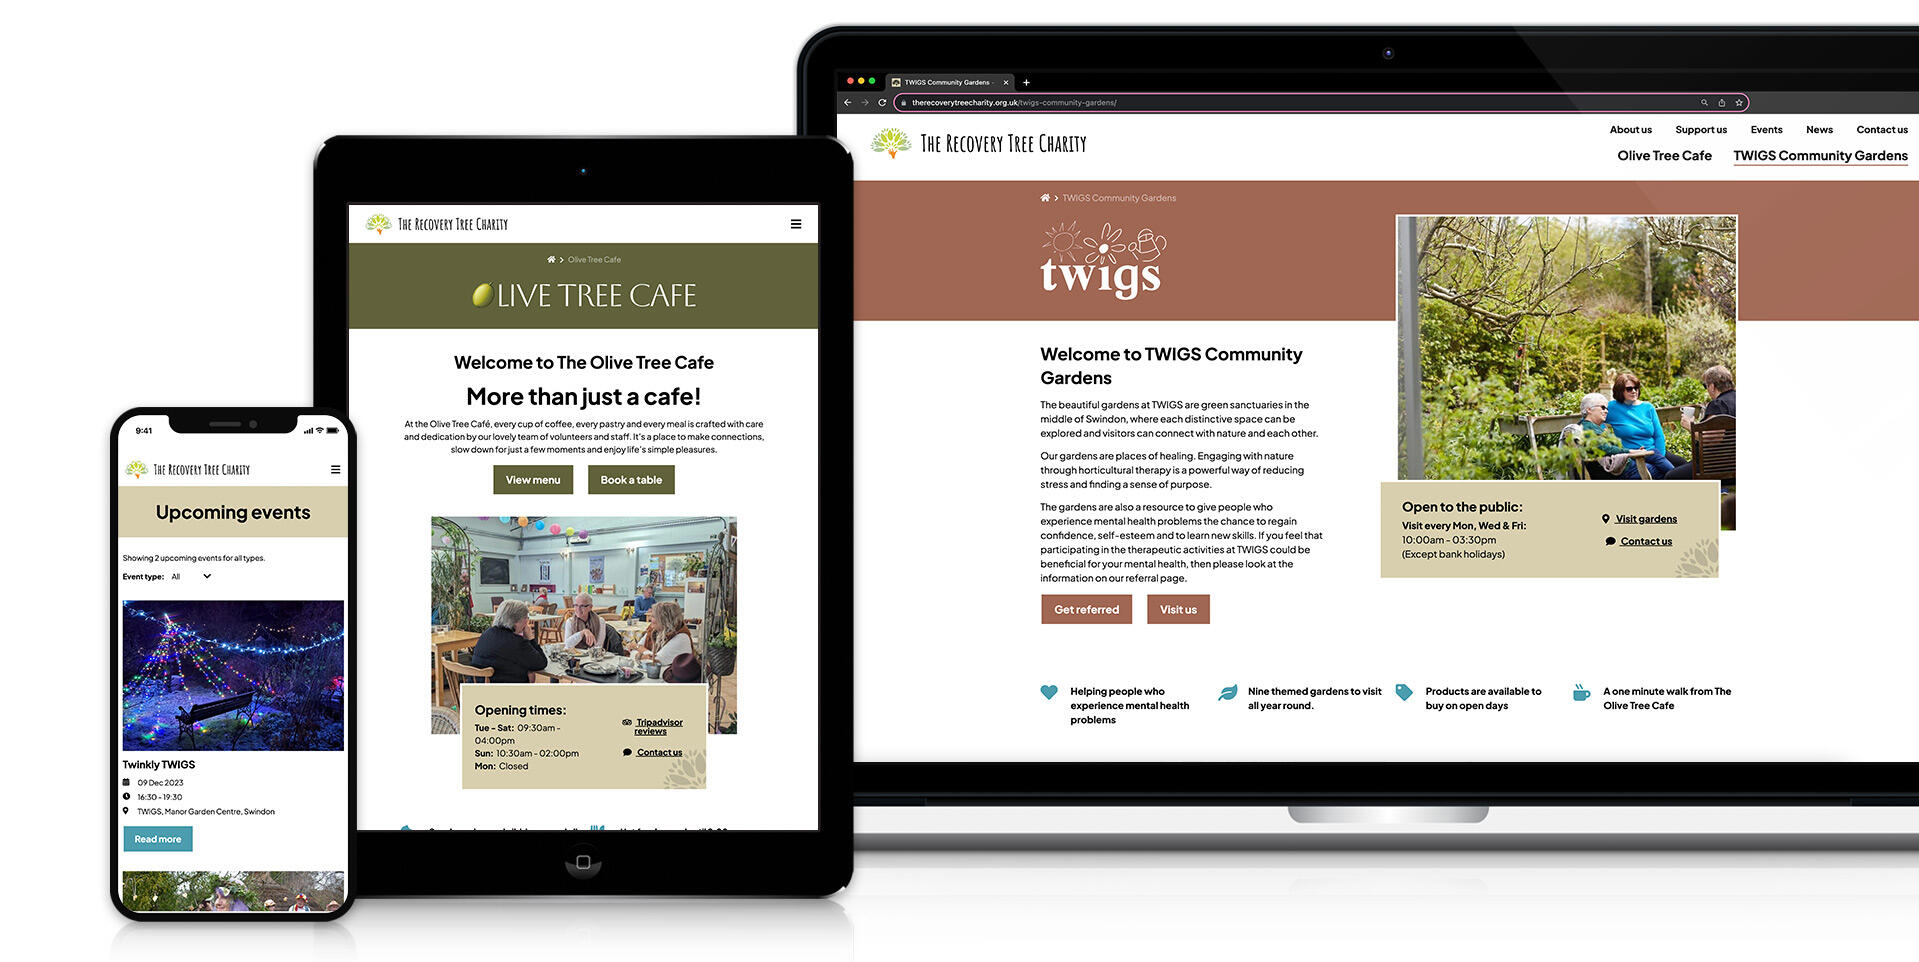 Responsive website design for The Recovery Tree Charity